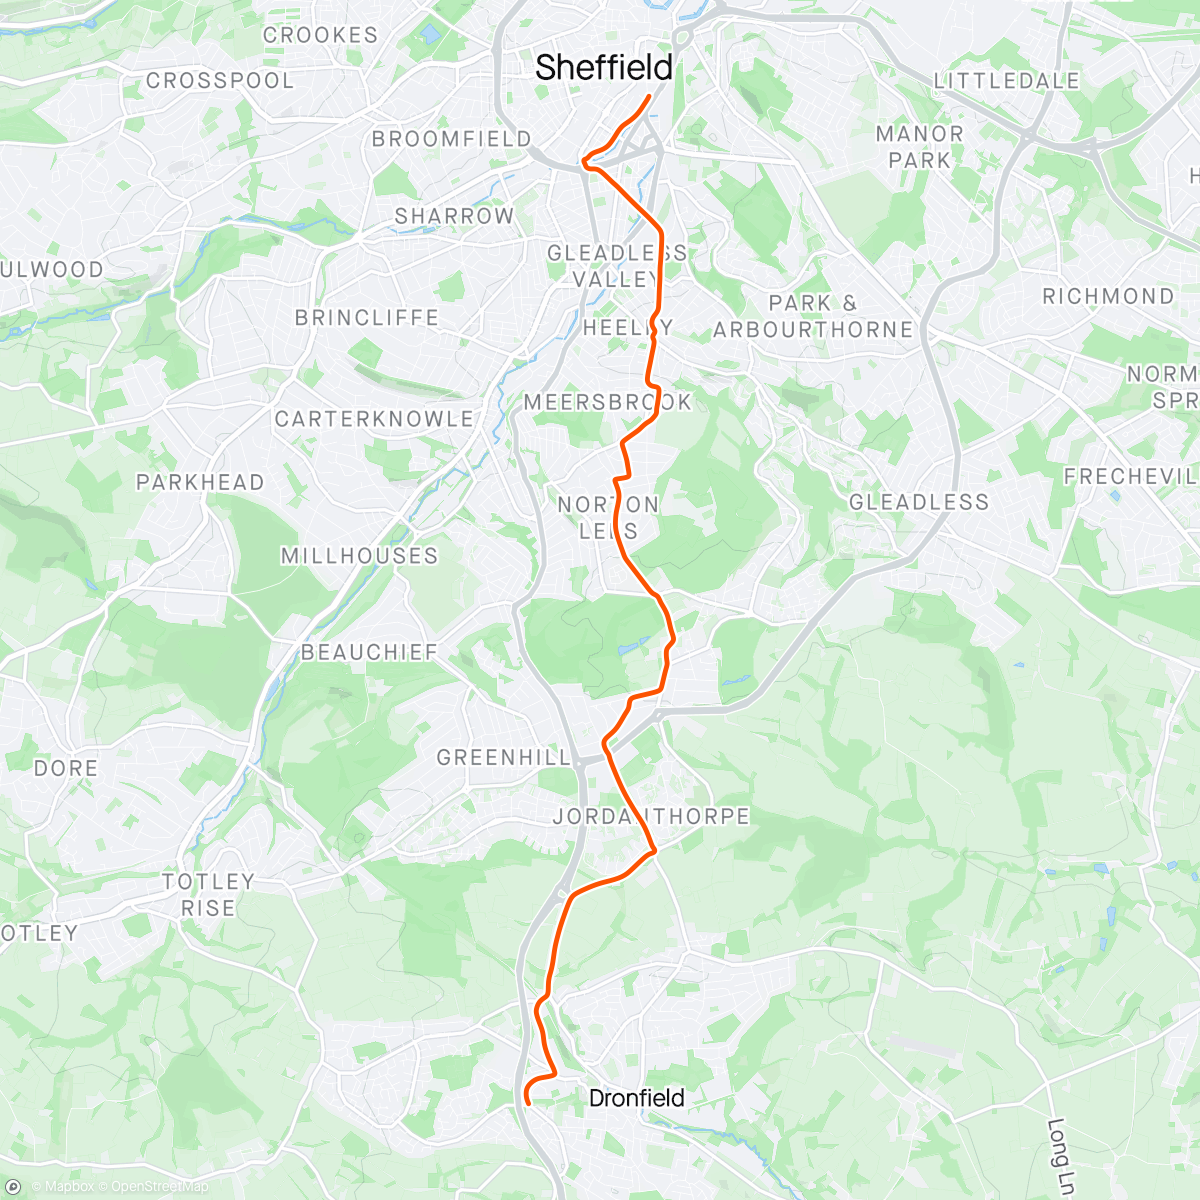 Mapa de la actividad, Escape Ride home, enjoyed that left before traffic, first shorts ride home, sweaty made the screwed up wet top from this morning pleasant 😂